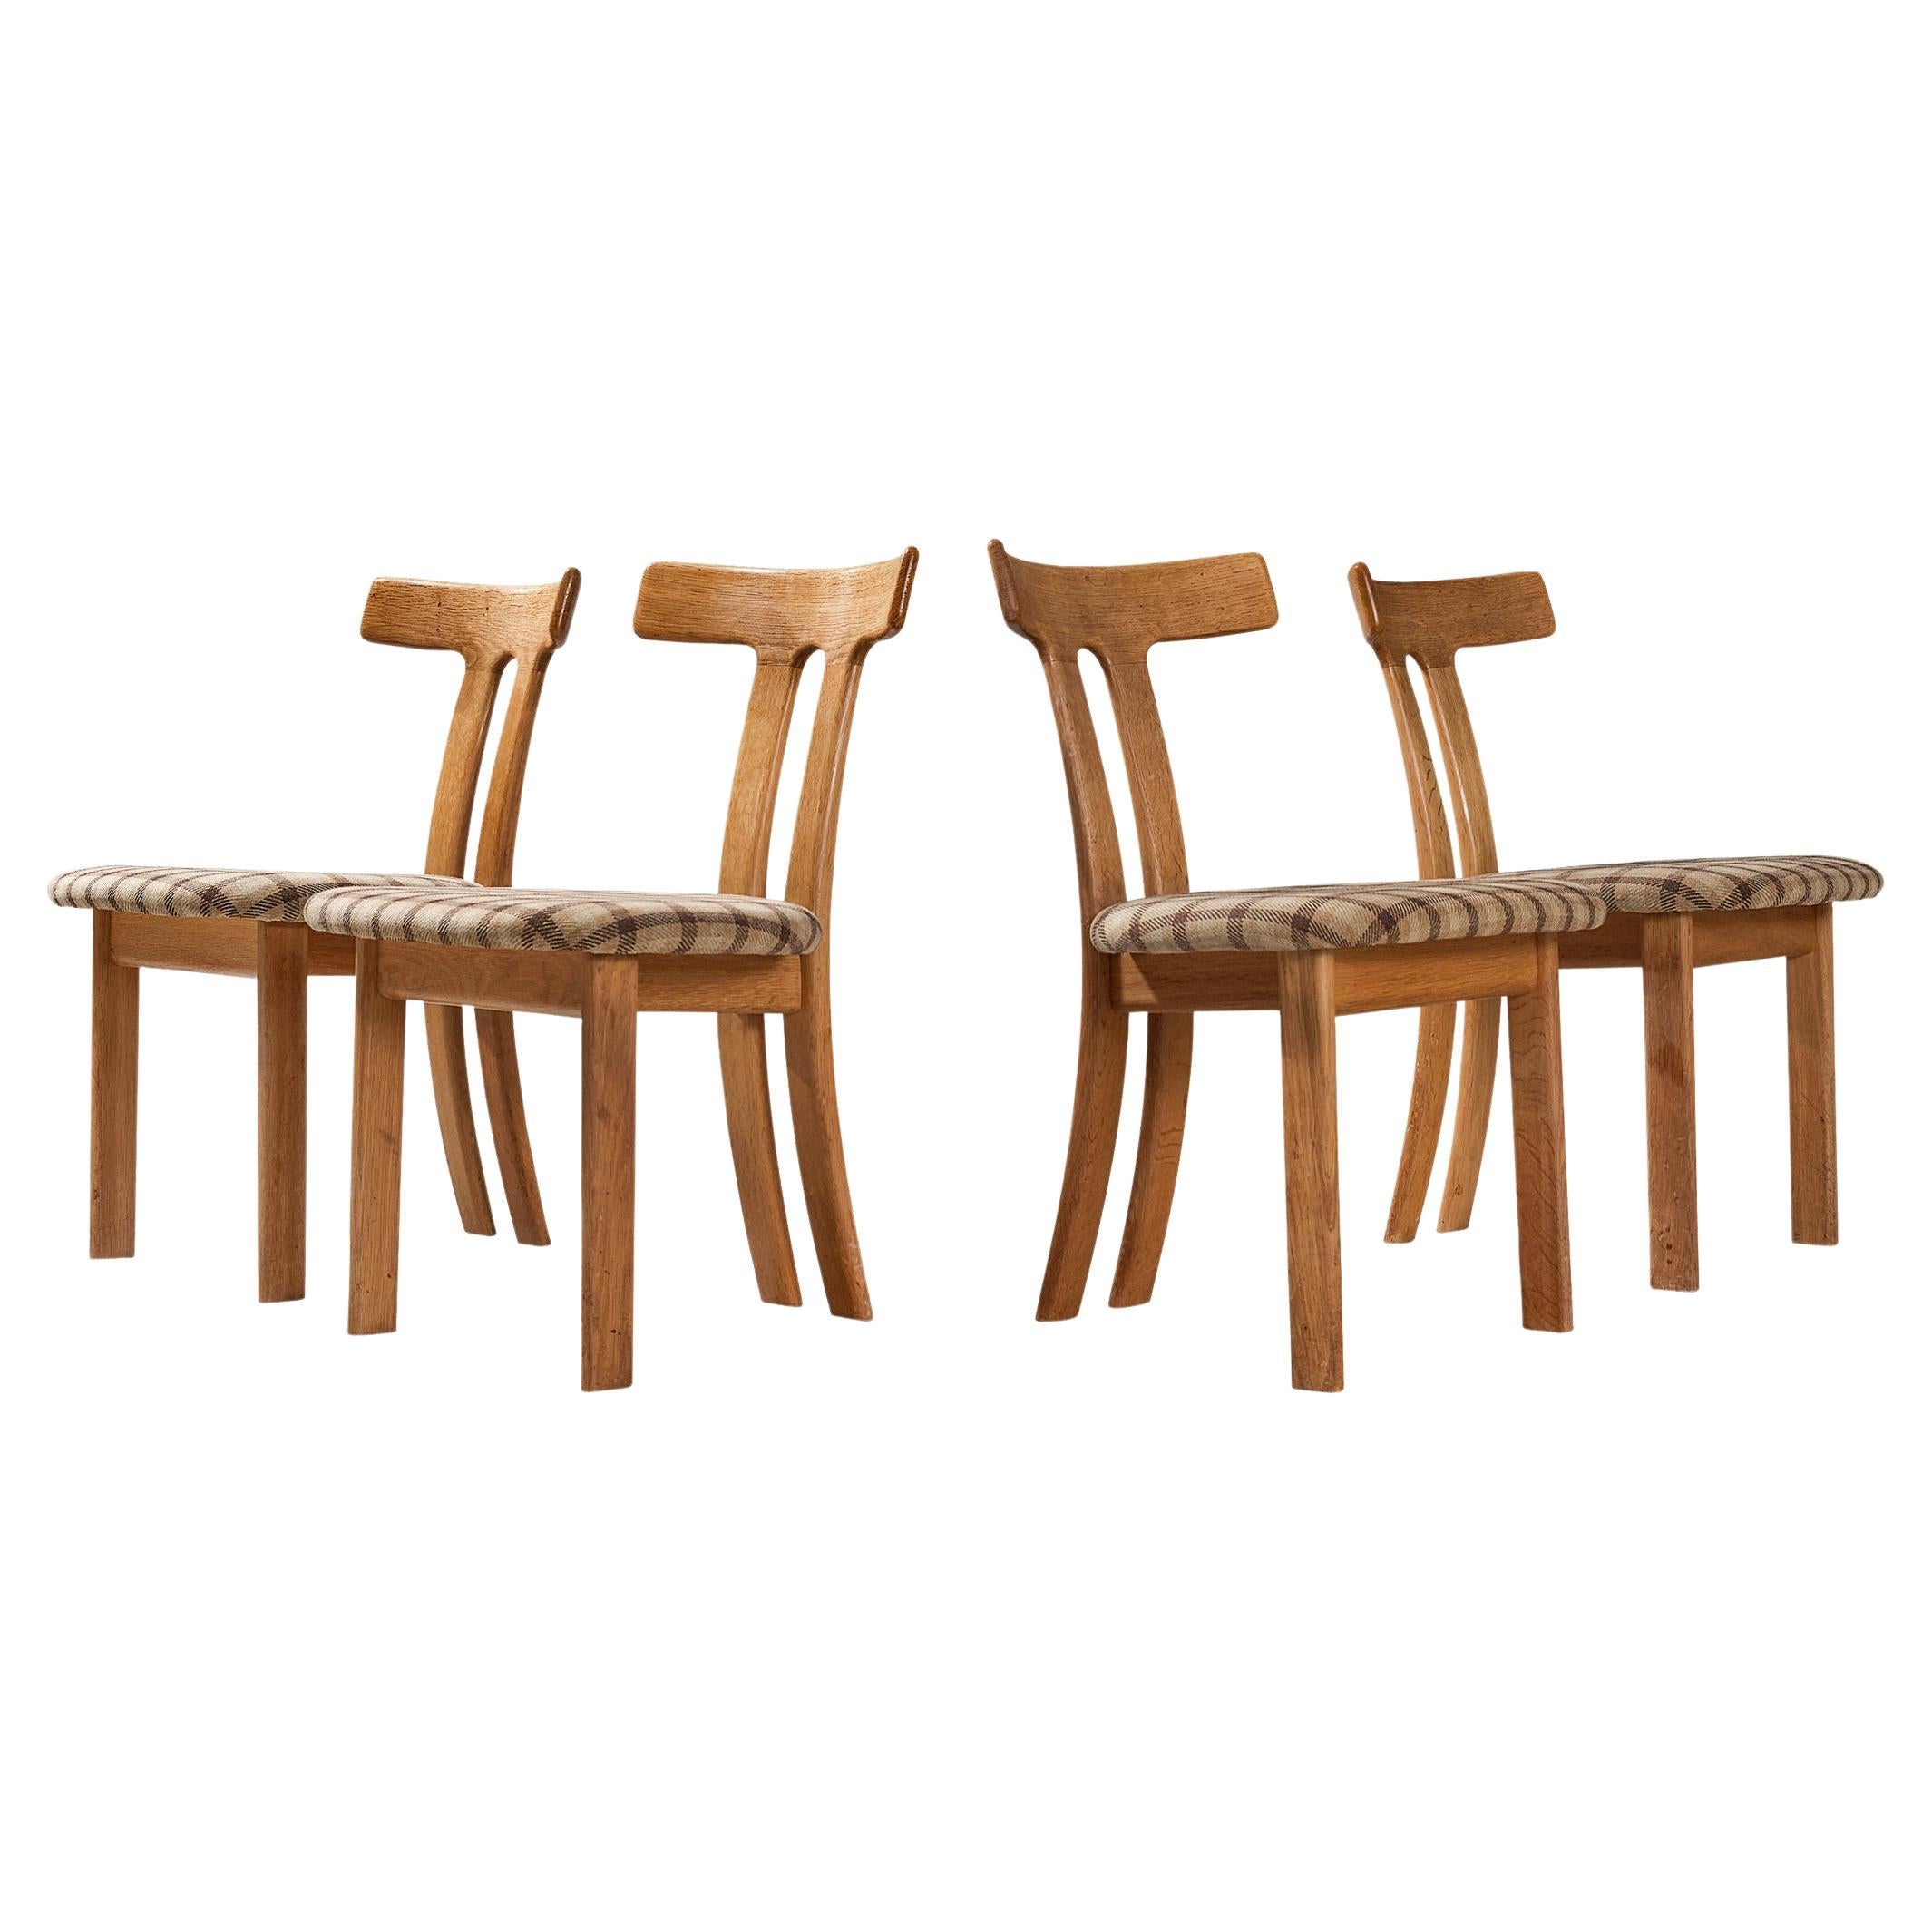 Set of Four 'T-shape' Dining Chairs in Oak and Brown Checkered Upholstery